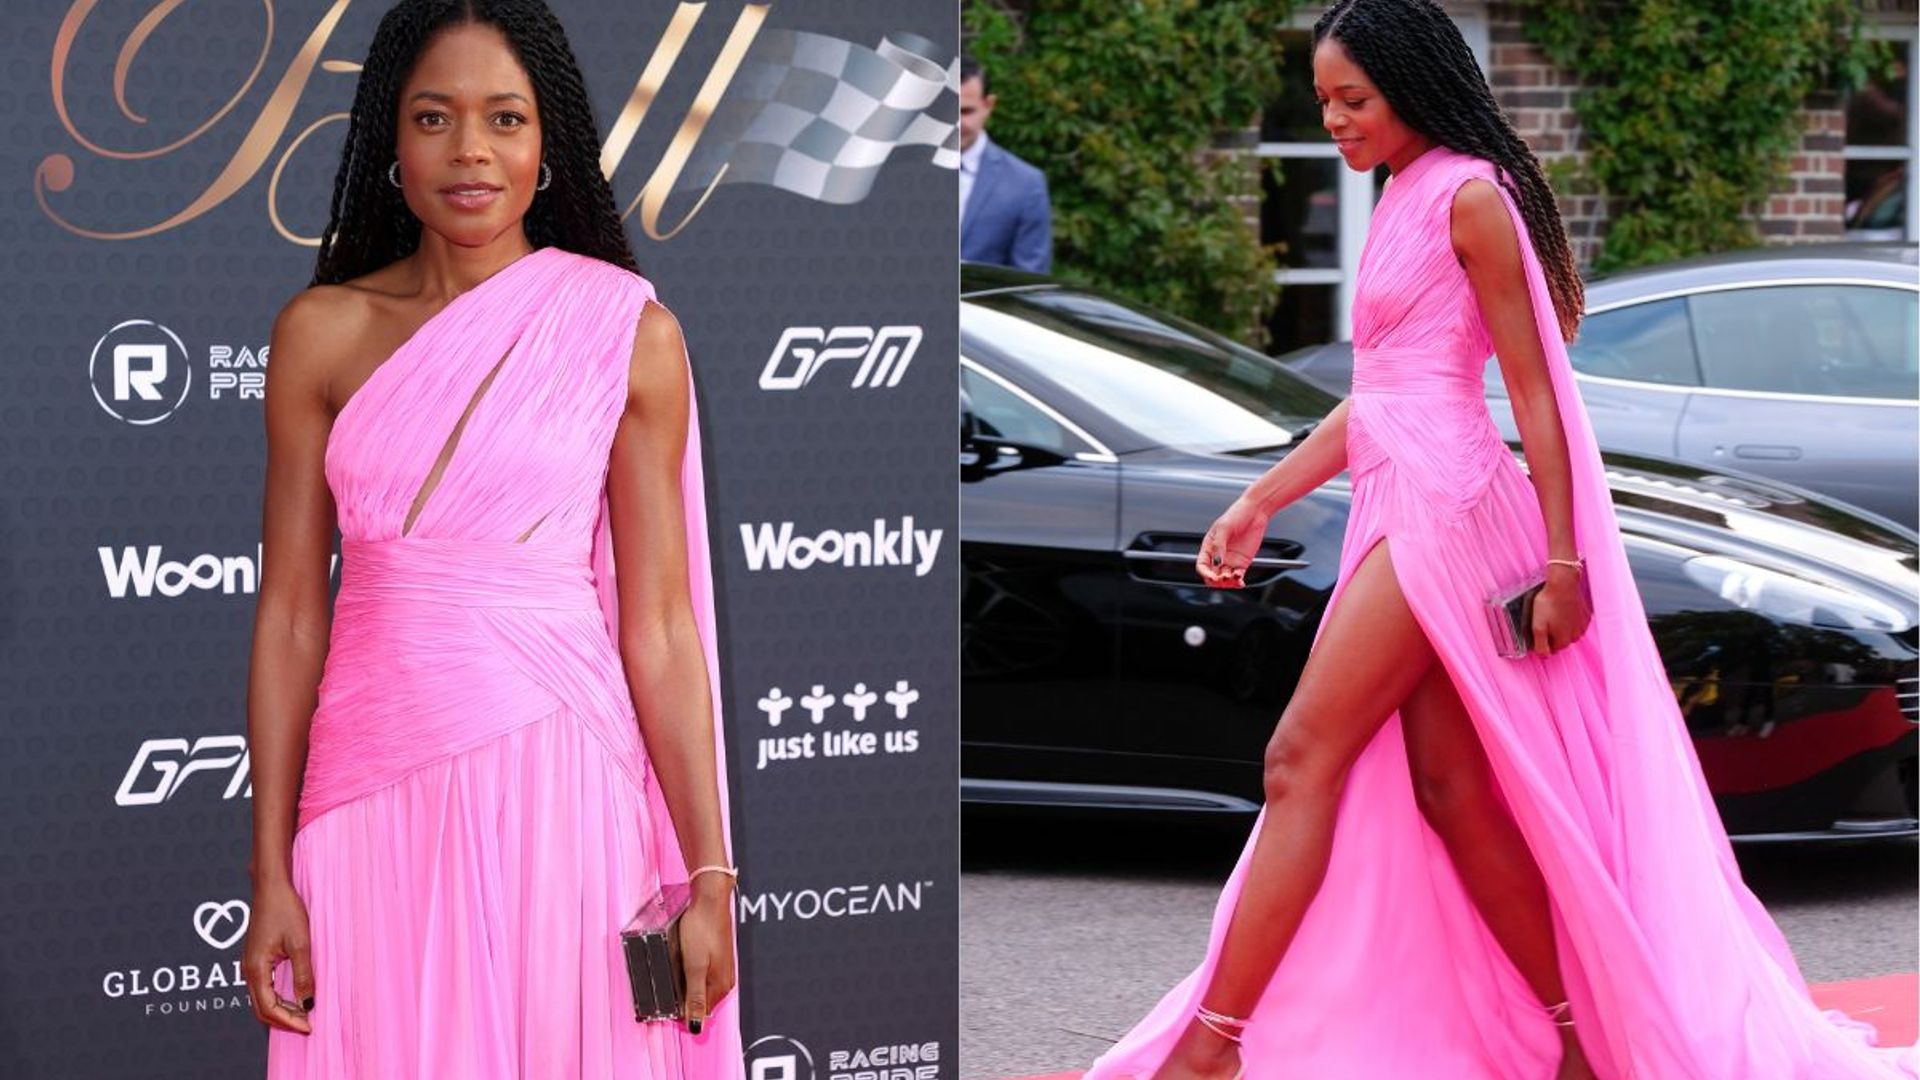 Naomie Harris stuns onlookers in hot pink at Grand Prix ball